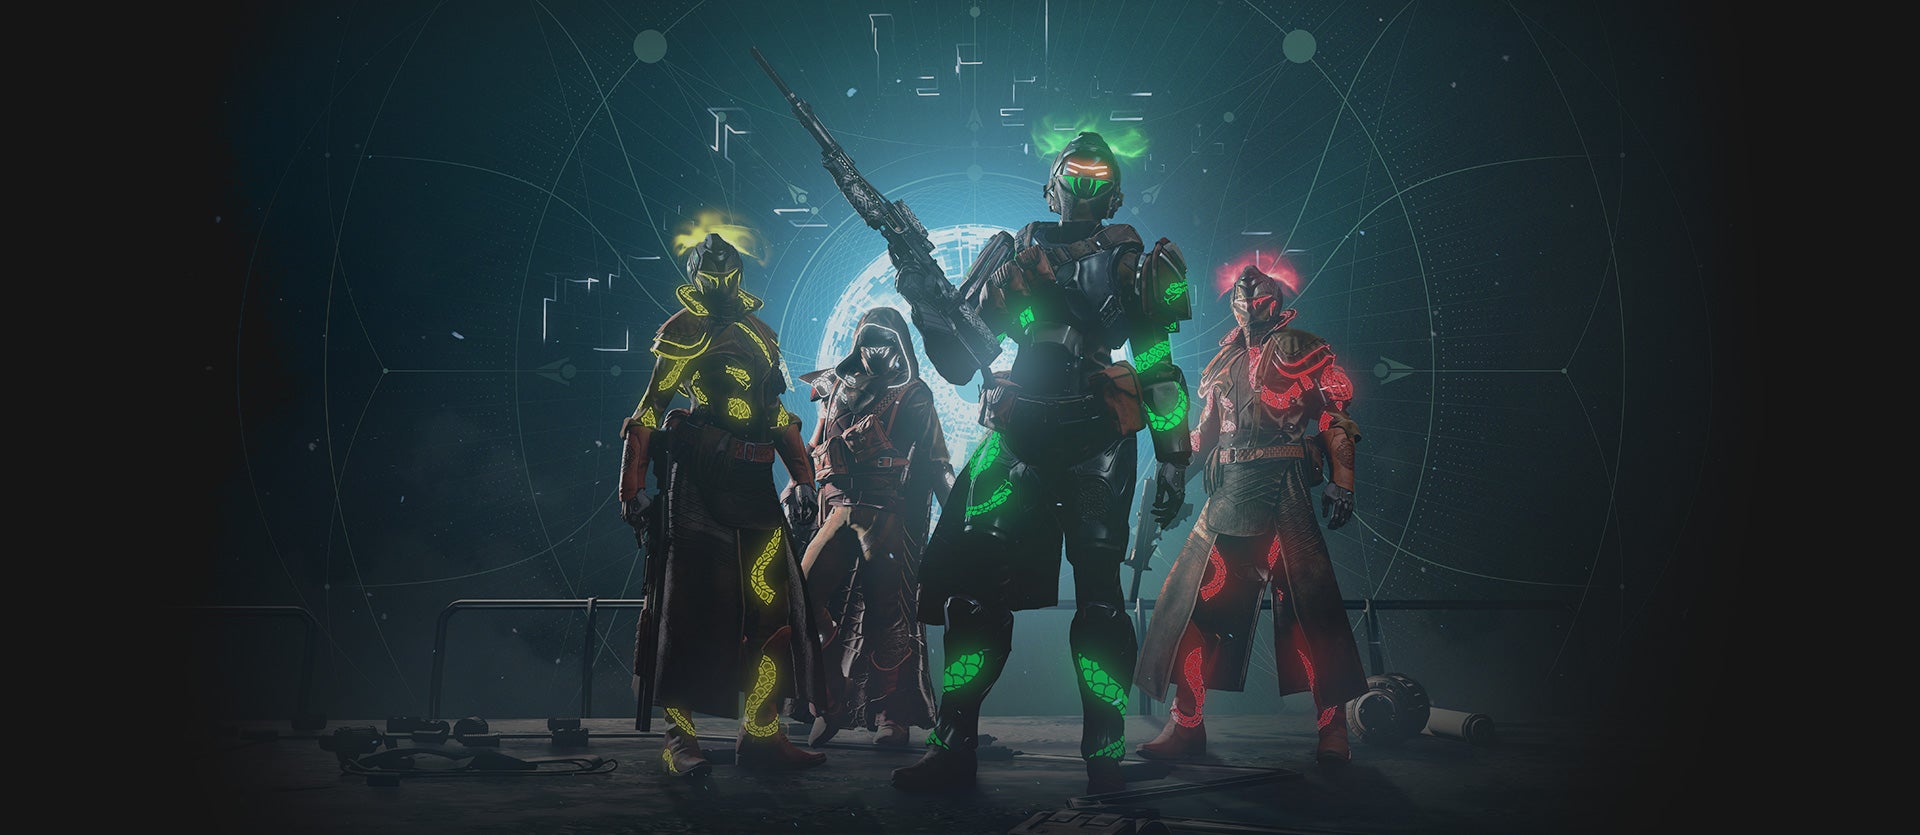 Image for Destiny 2: how to succeed in Gambit Prime and The Reckoning